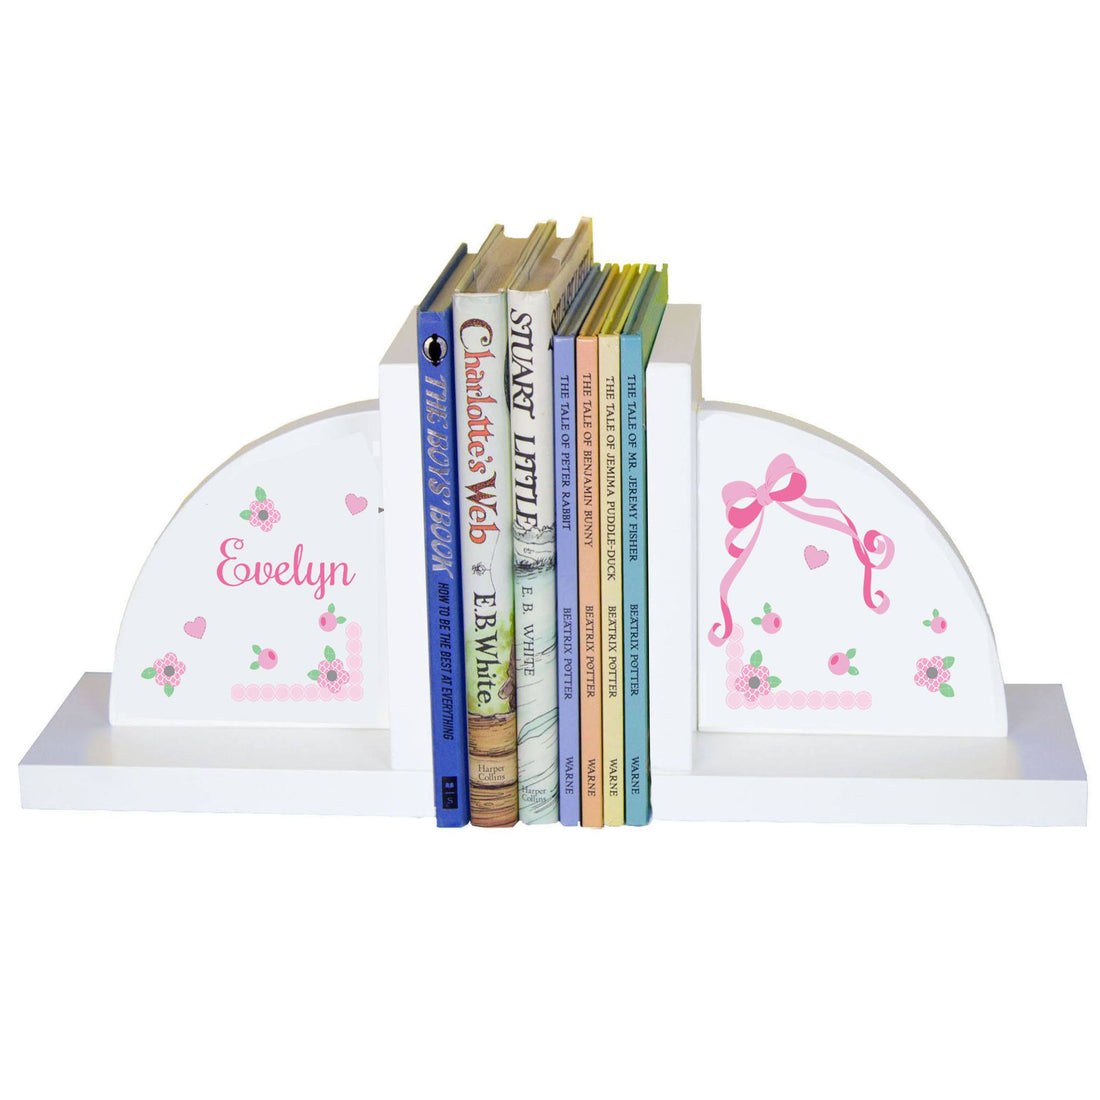 Personalized White Bookends with Pink Bow design